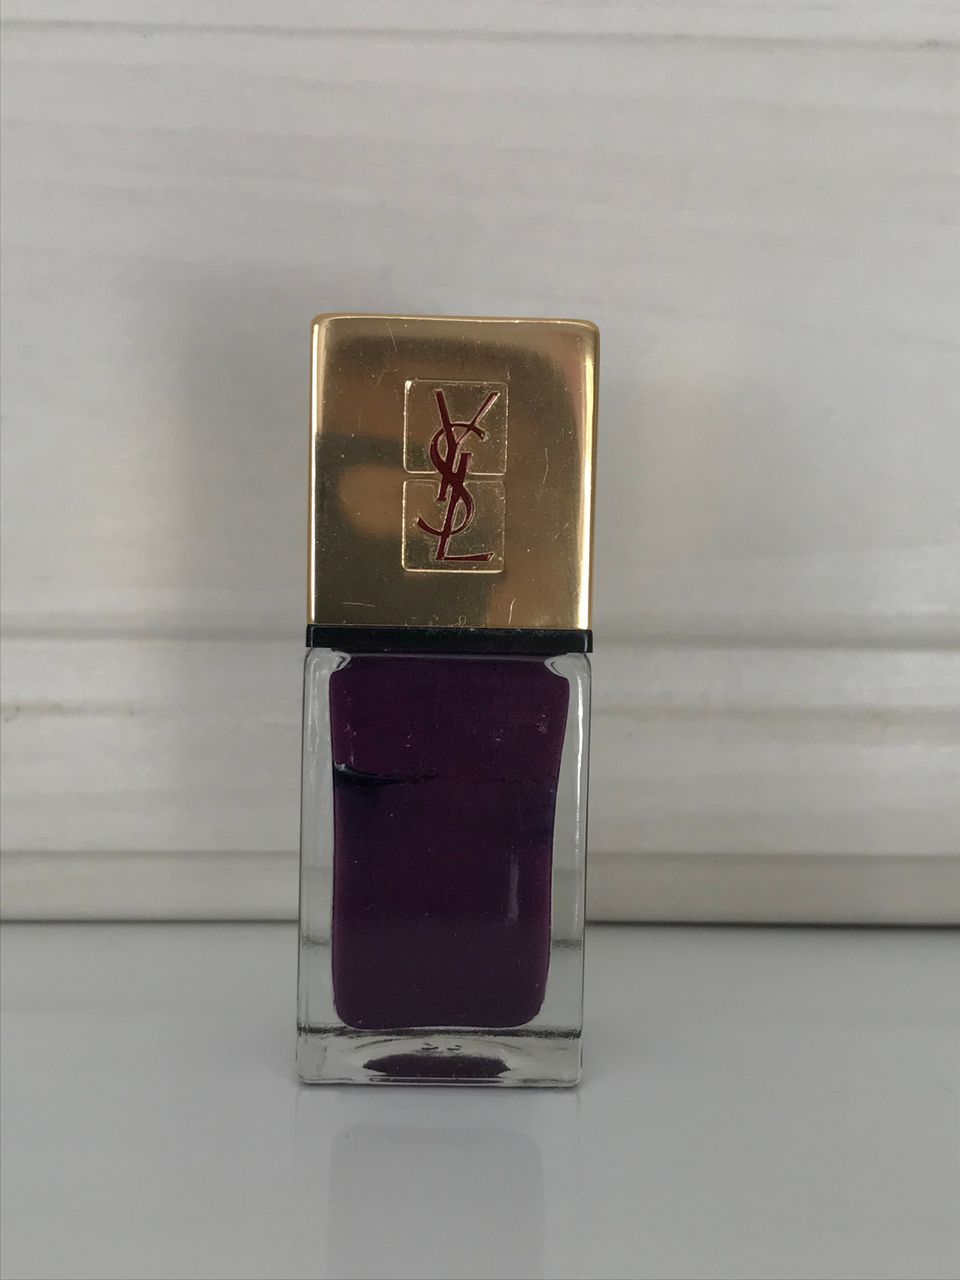 YSL kynsilakka "Violet barqque" Couture